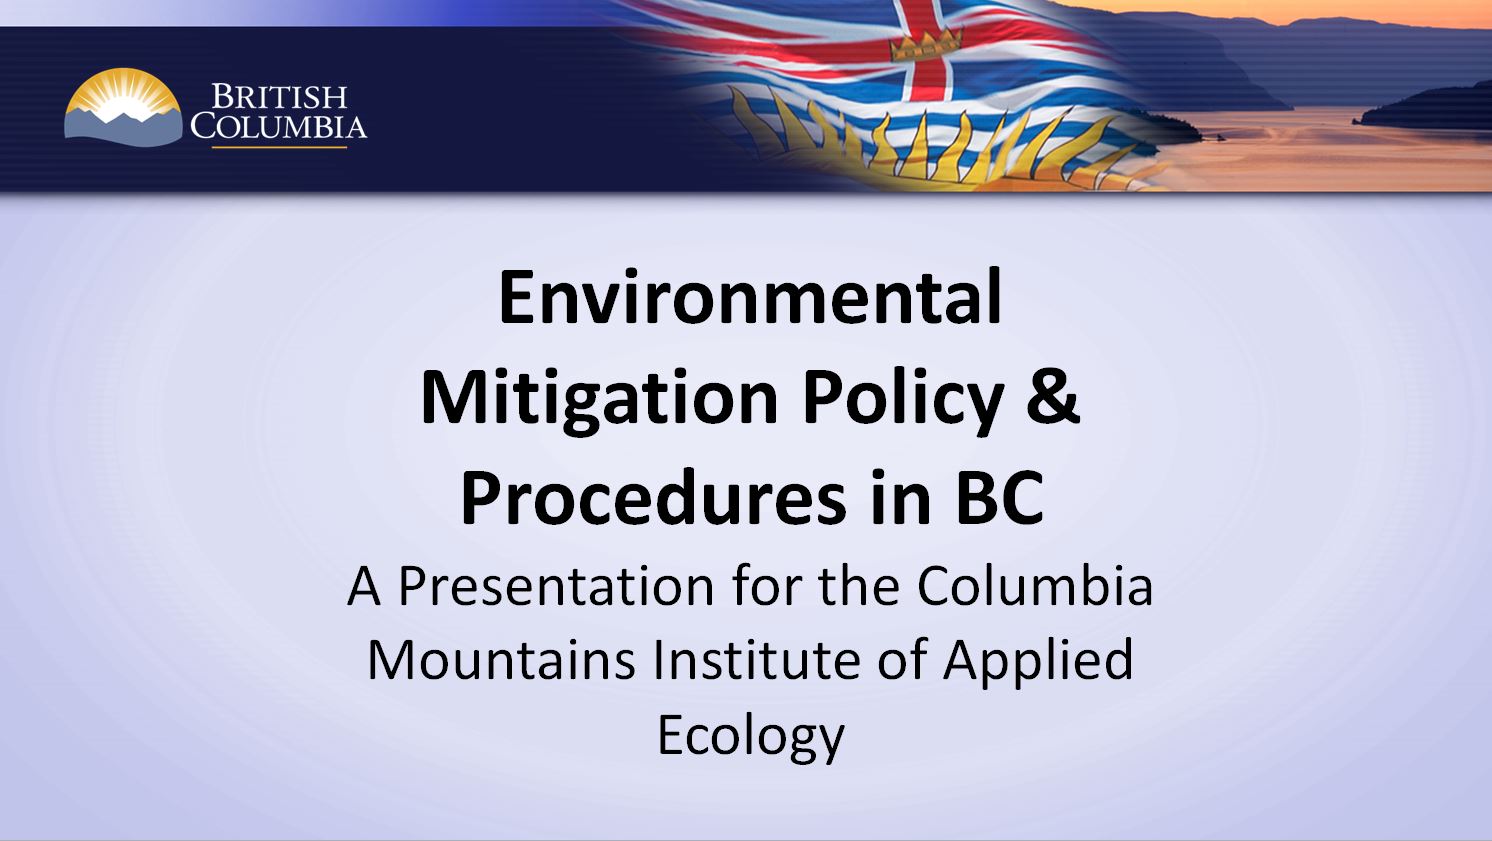 Overview of environmental mitigation policy in B.C.